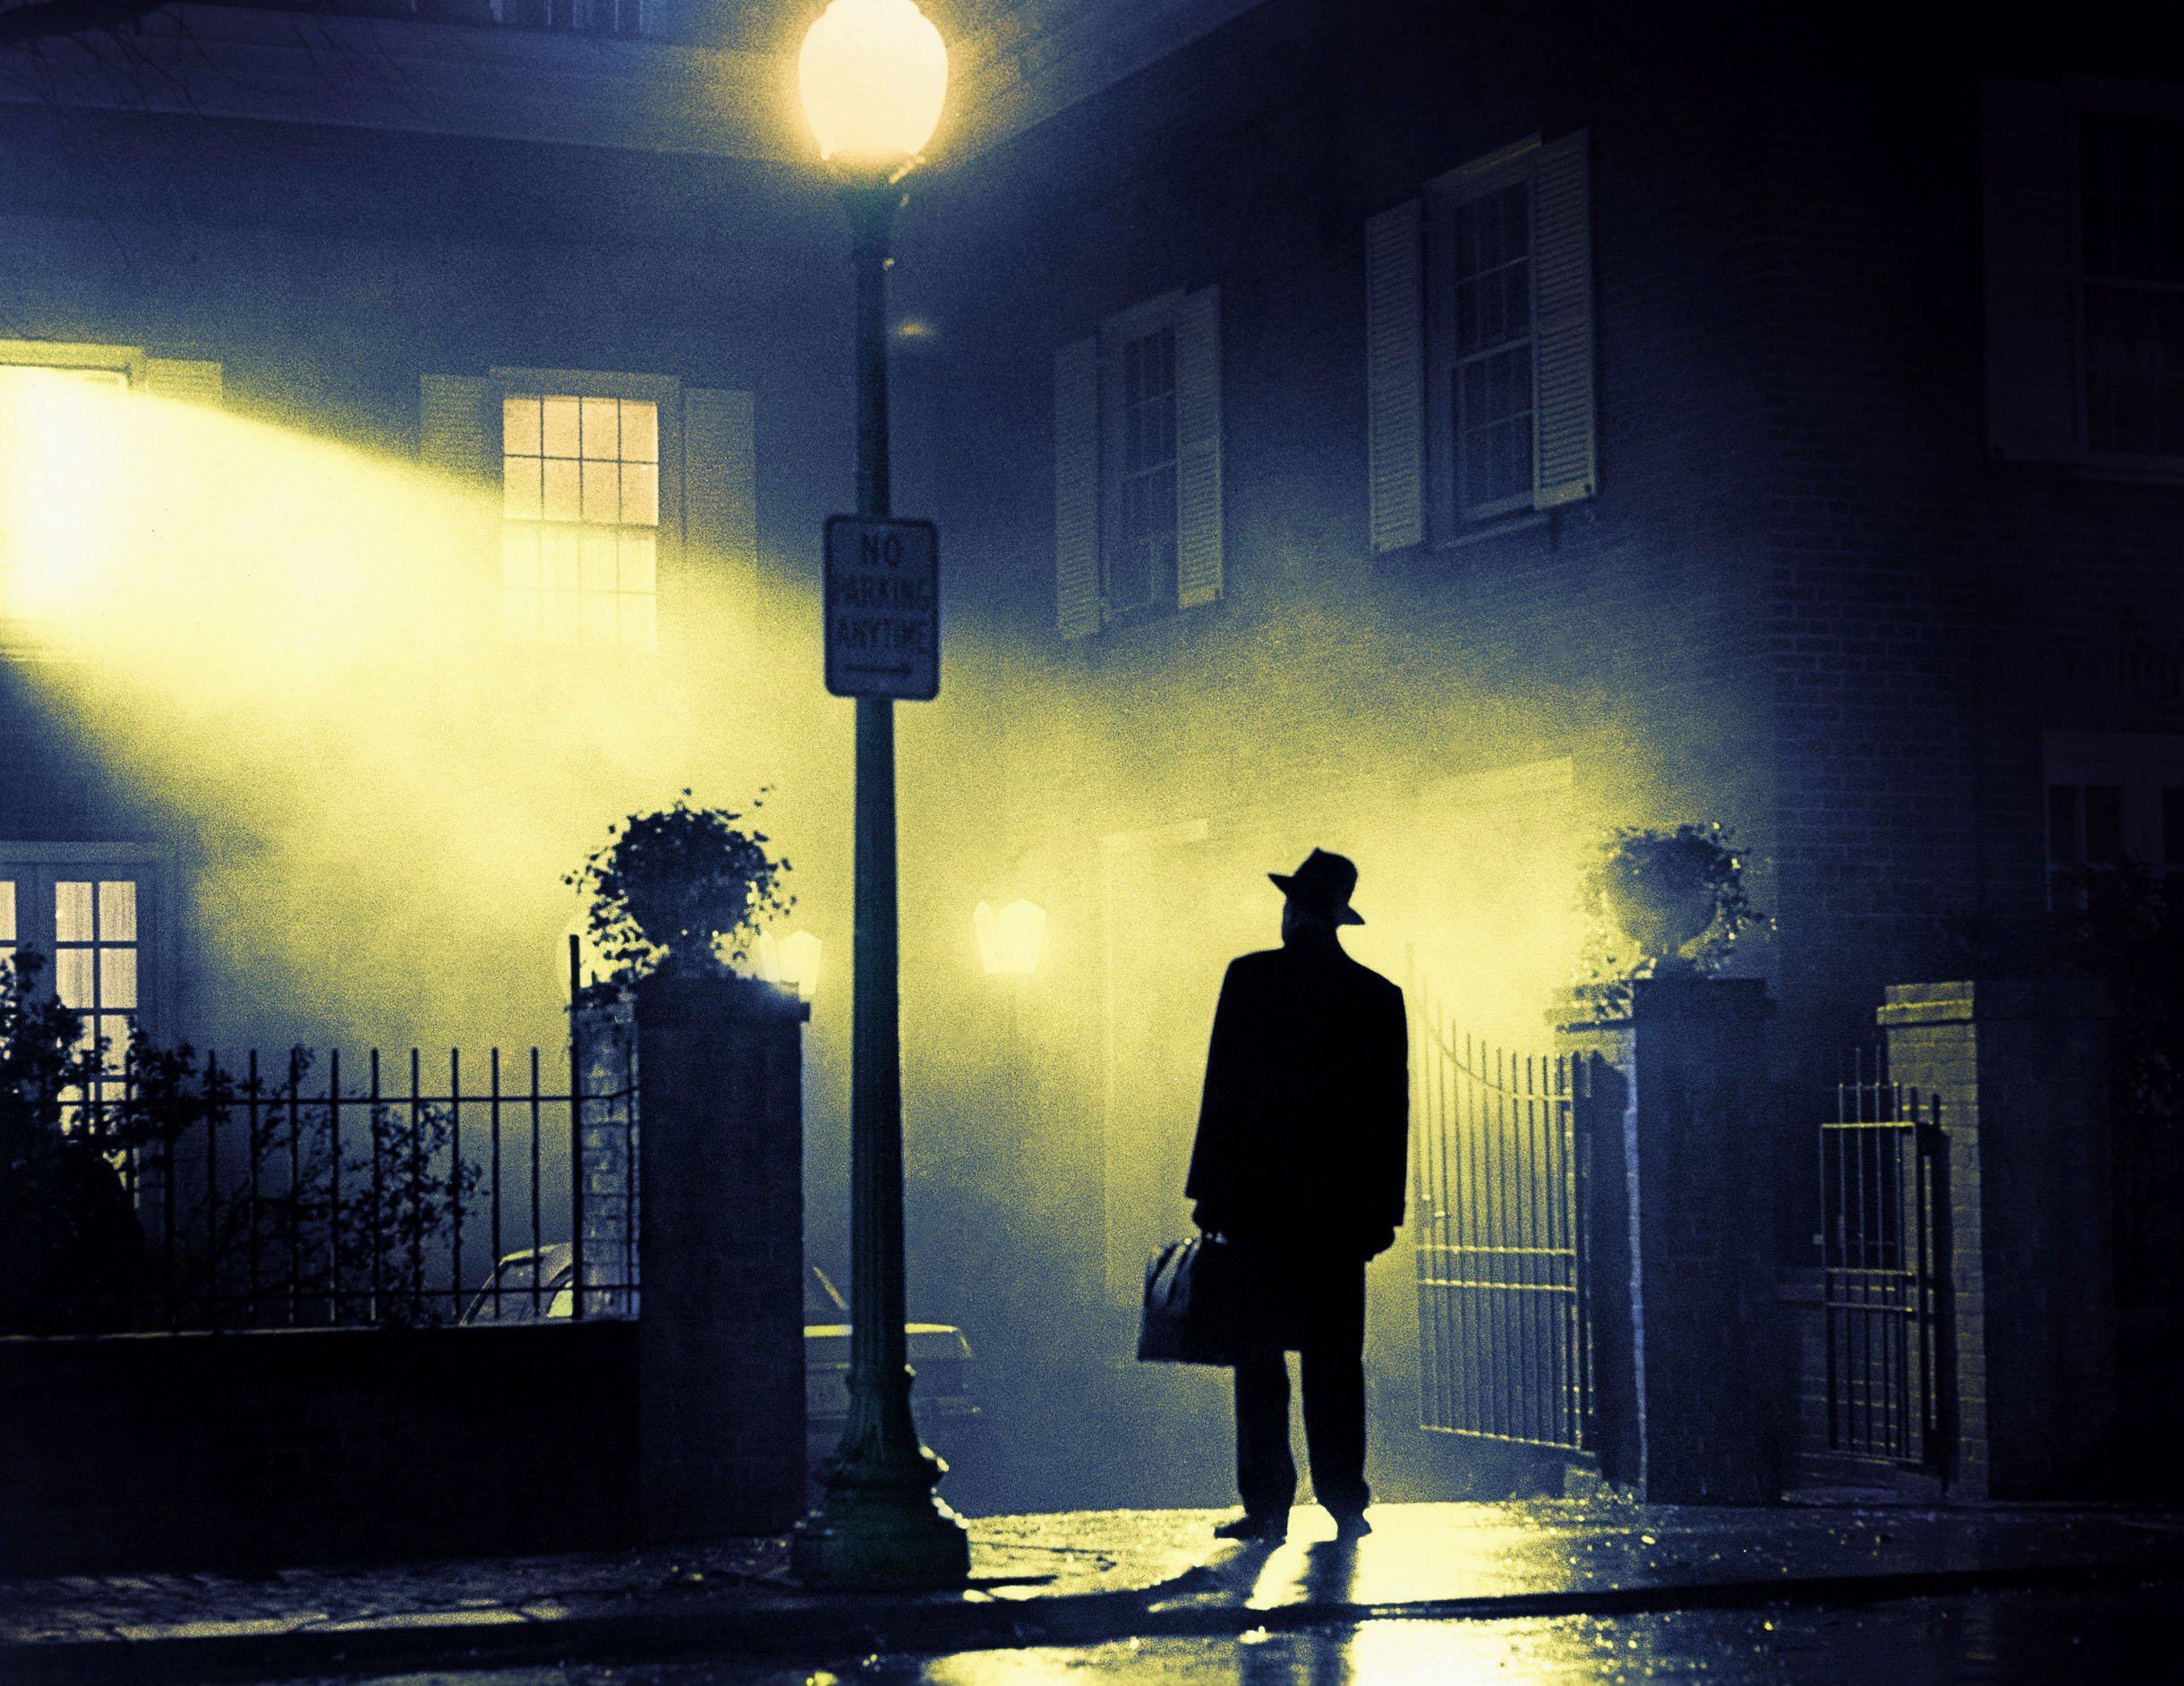 A man with a hat and briefcase basks in a light outside of a home at night